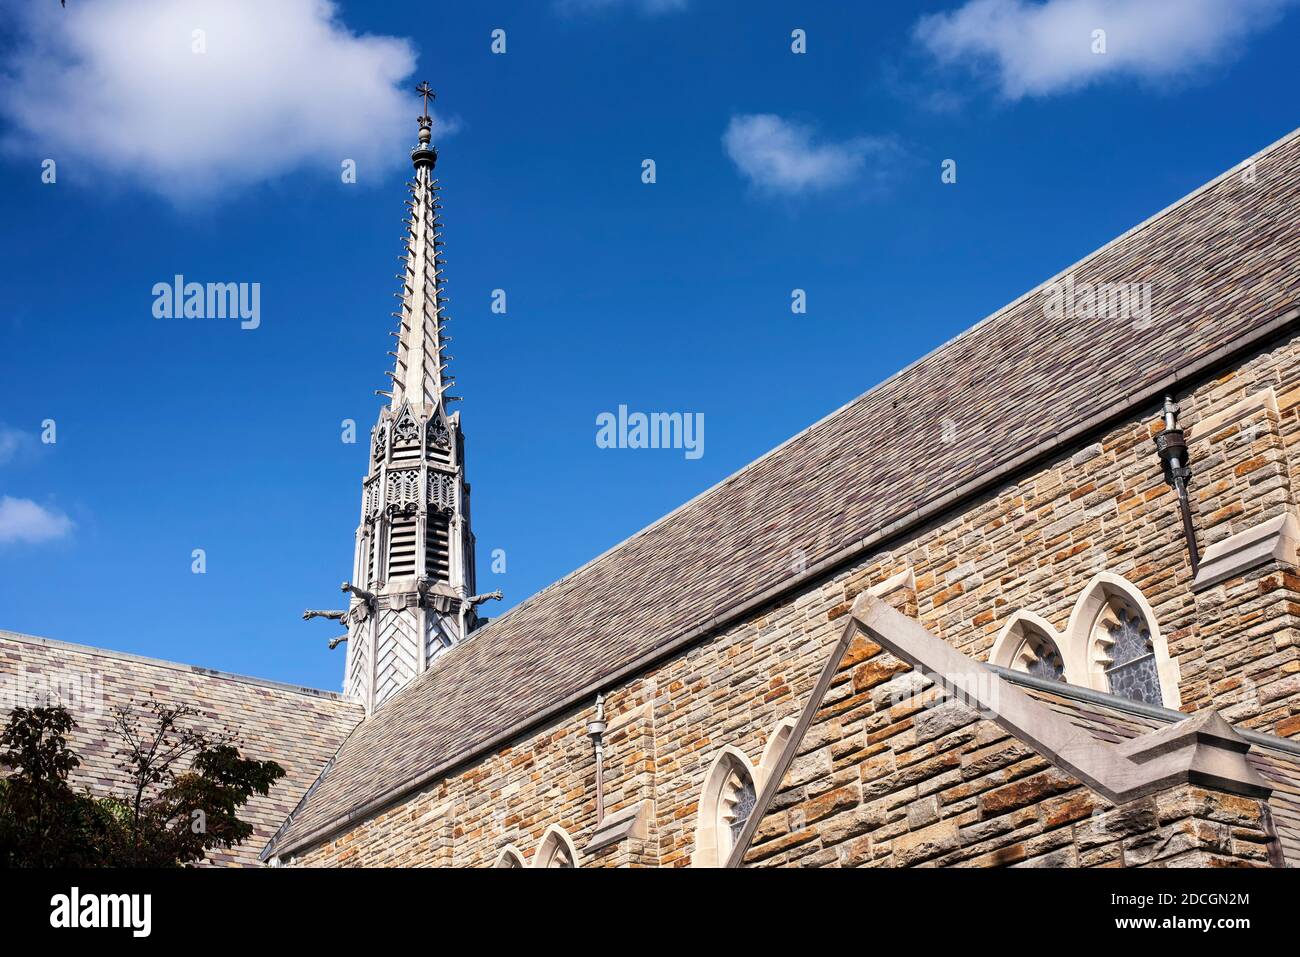 The steeple and exterior of the loyola alumni memorial chapel on the evergreen campus at Loyola University in Baltimore Maryland on a sunny blue sky d Stock Photo